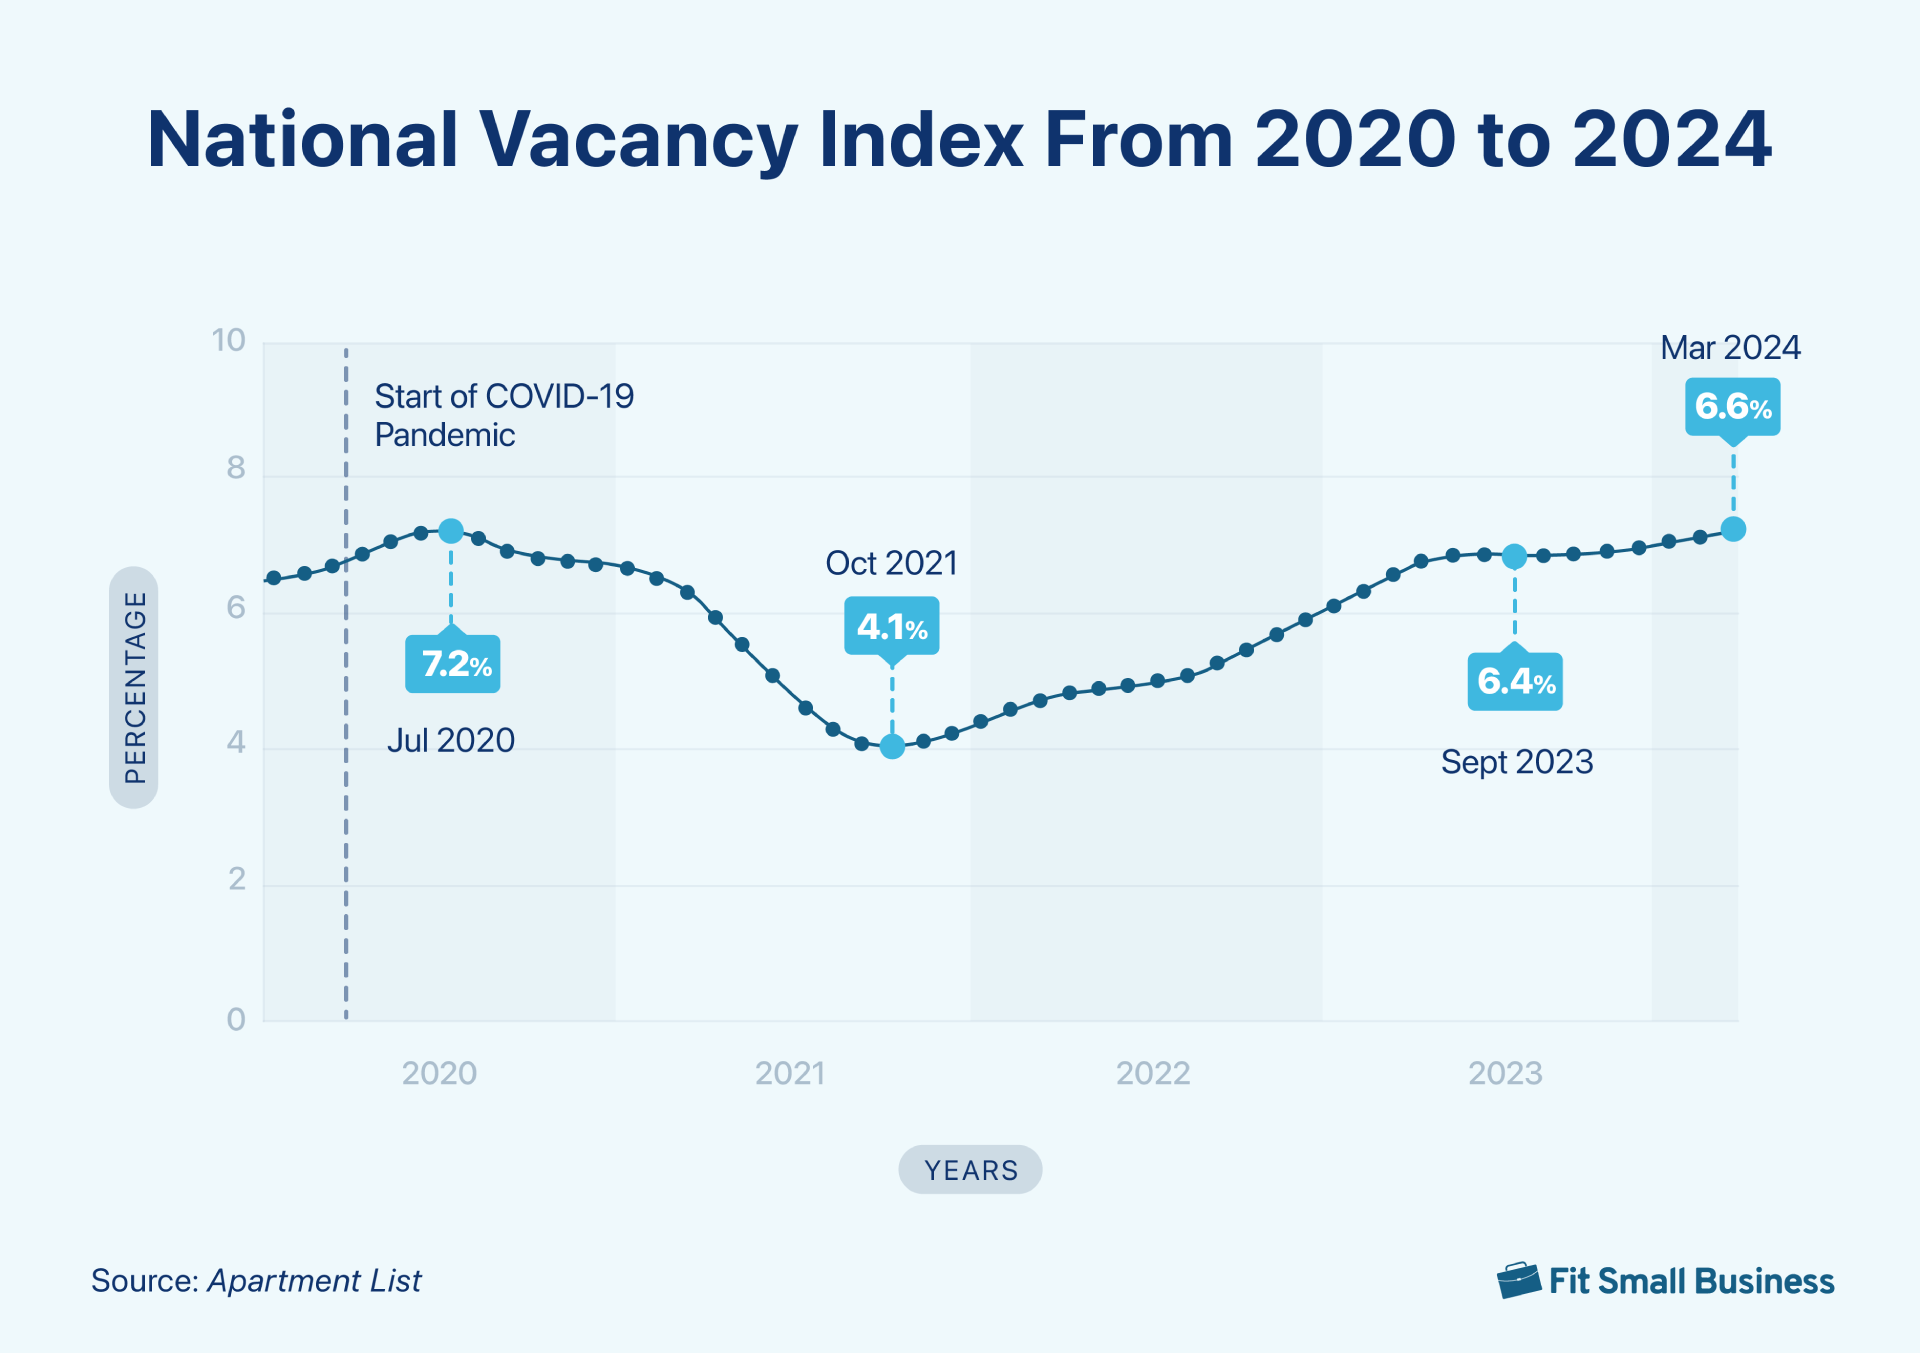 Graph indicating the national vacancy rate trends from 2020 to 2024